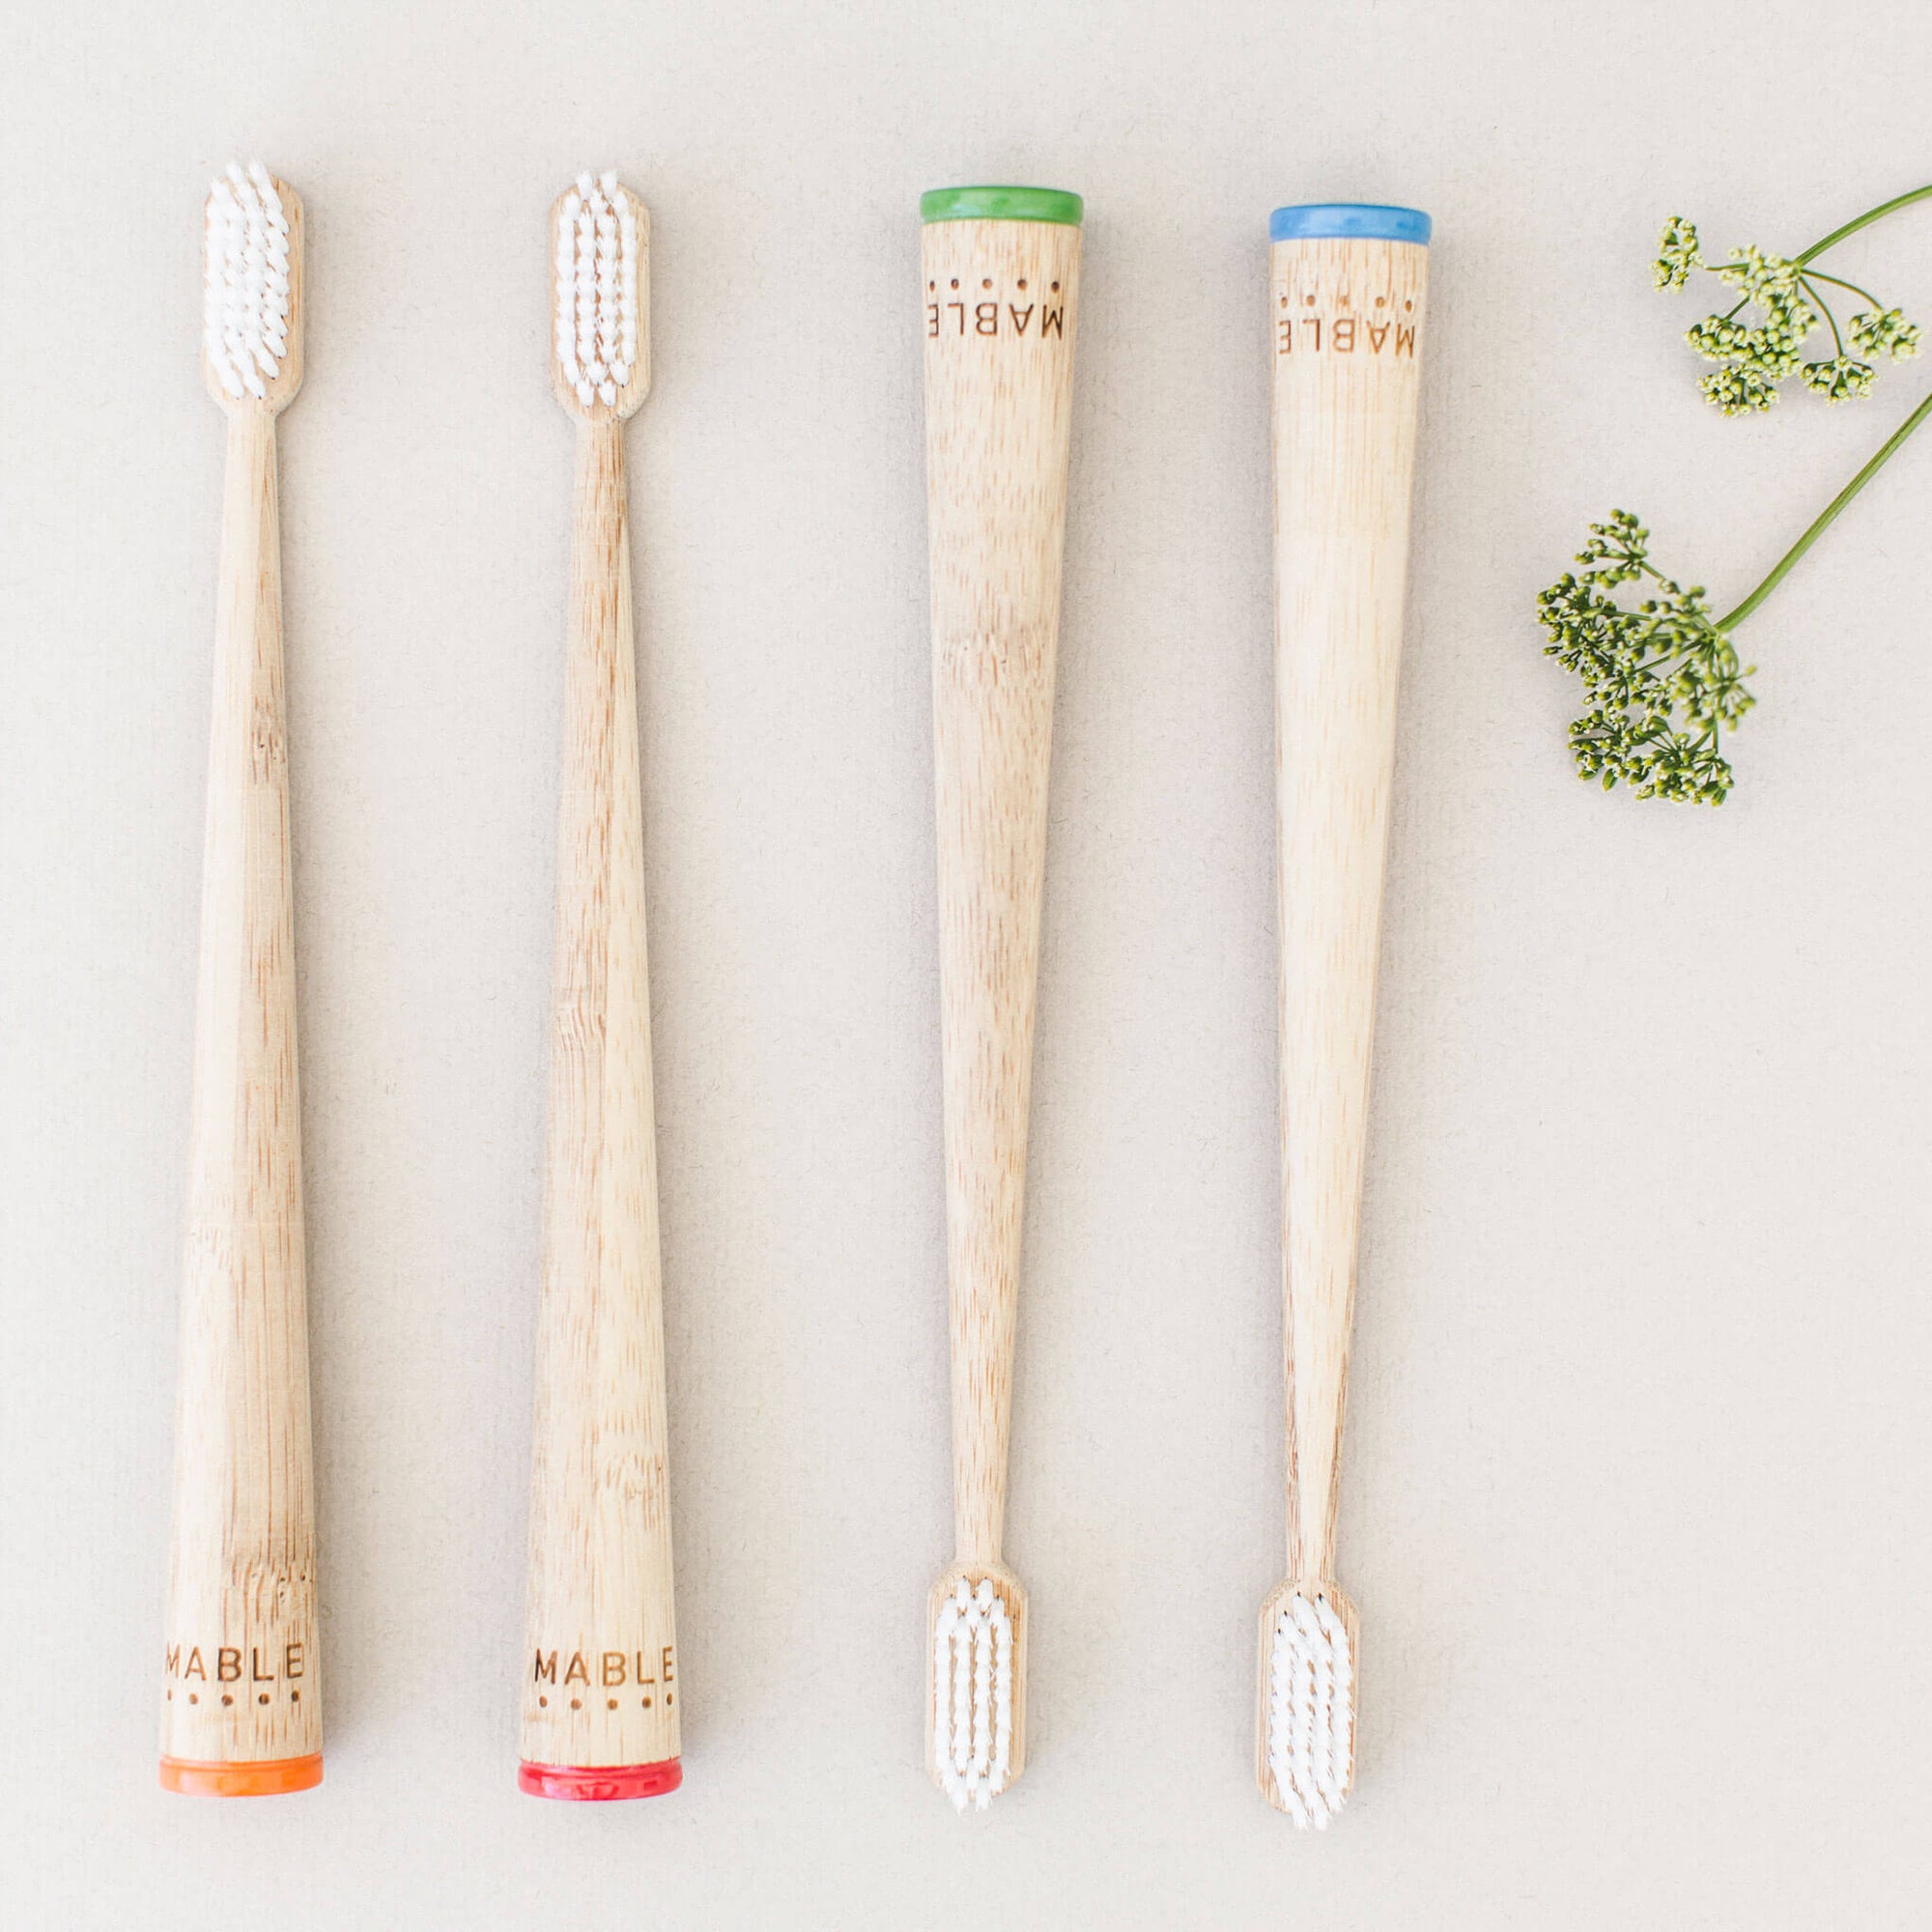 Mable four pack, Mable bamboo toothbrush, mable kids toothbrush, kids bamboo toothbrush, four pack toothbrush, Four pack bamboo toothbrush, mable four pack bamboo toothbrush, toothbrush packs, bamboo toothbrush packs